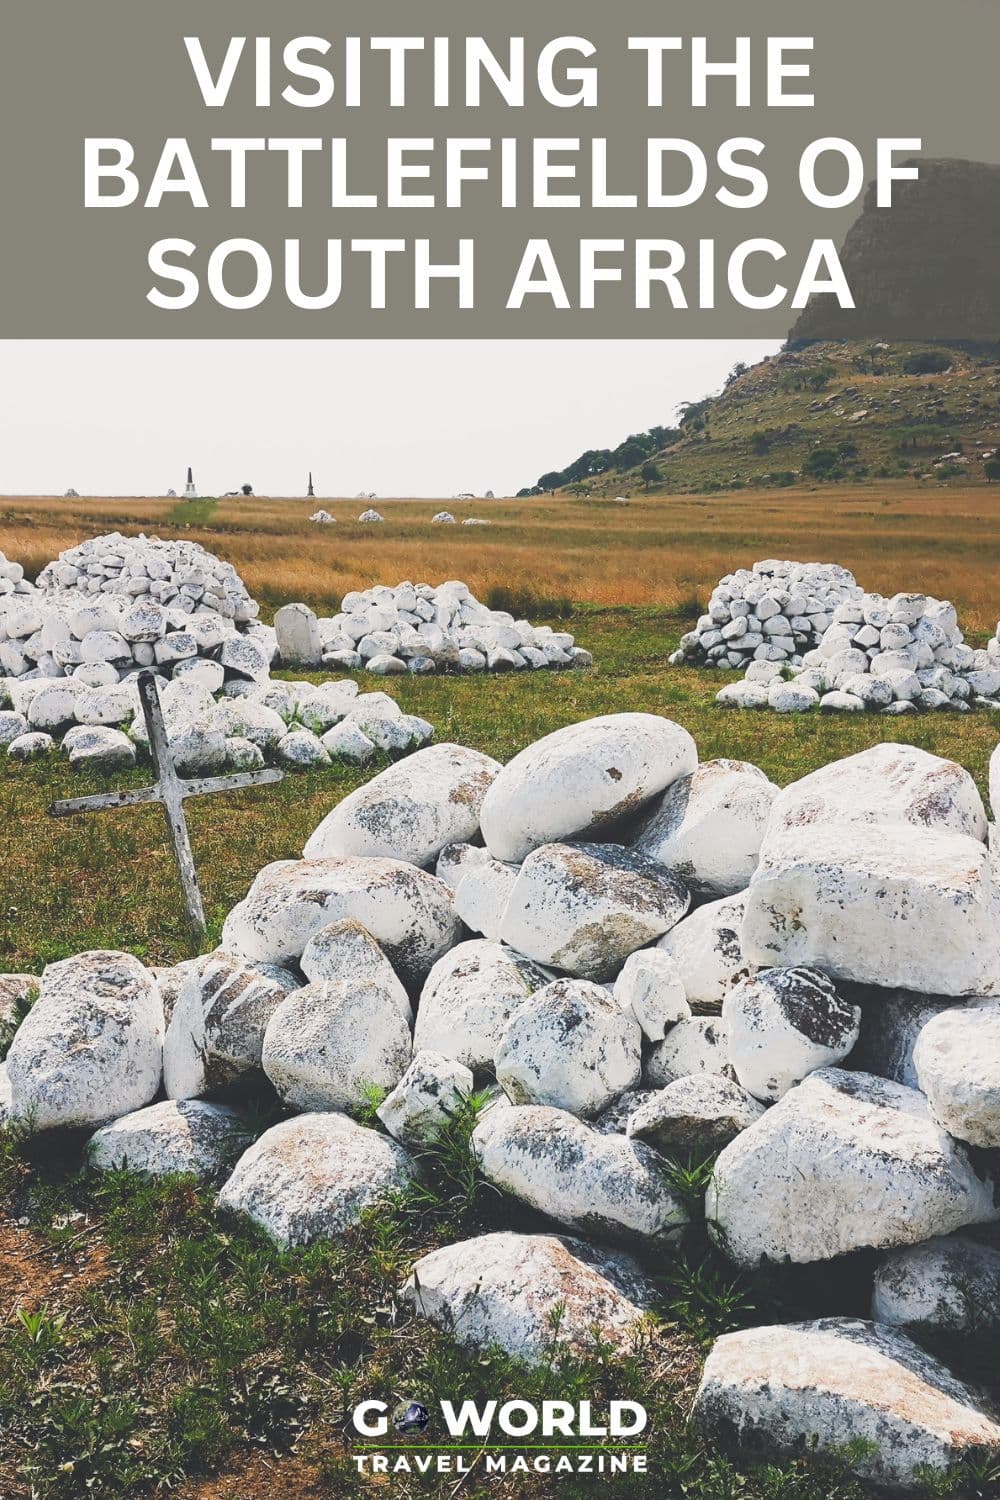 To learn about Zulu culture and historical events, visit the Battlefields of South Africa. Here the author takes us to the top 3 battlefields. #southafrica